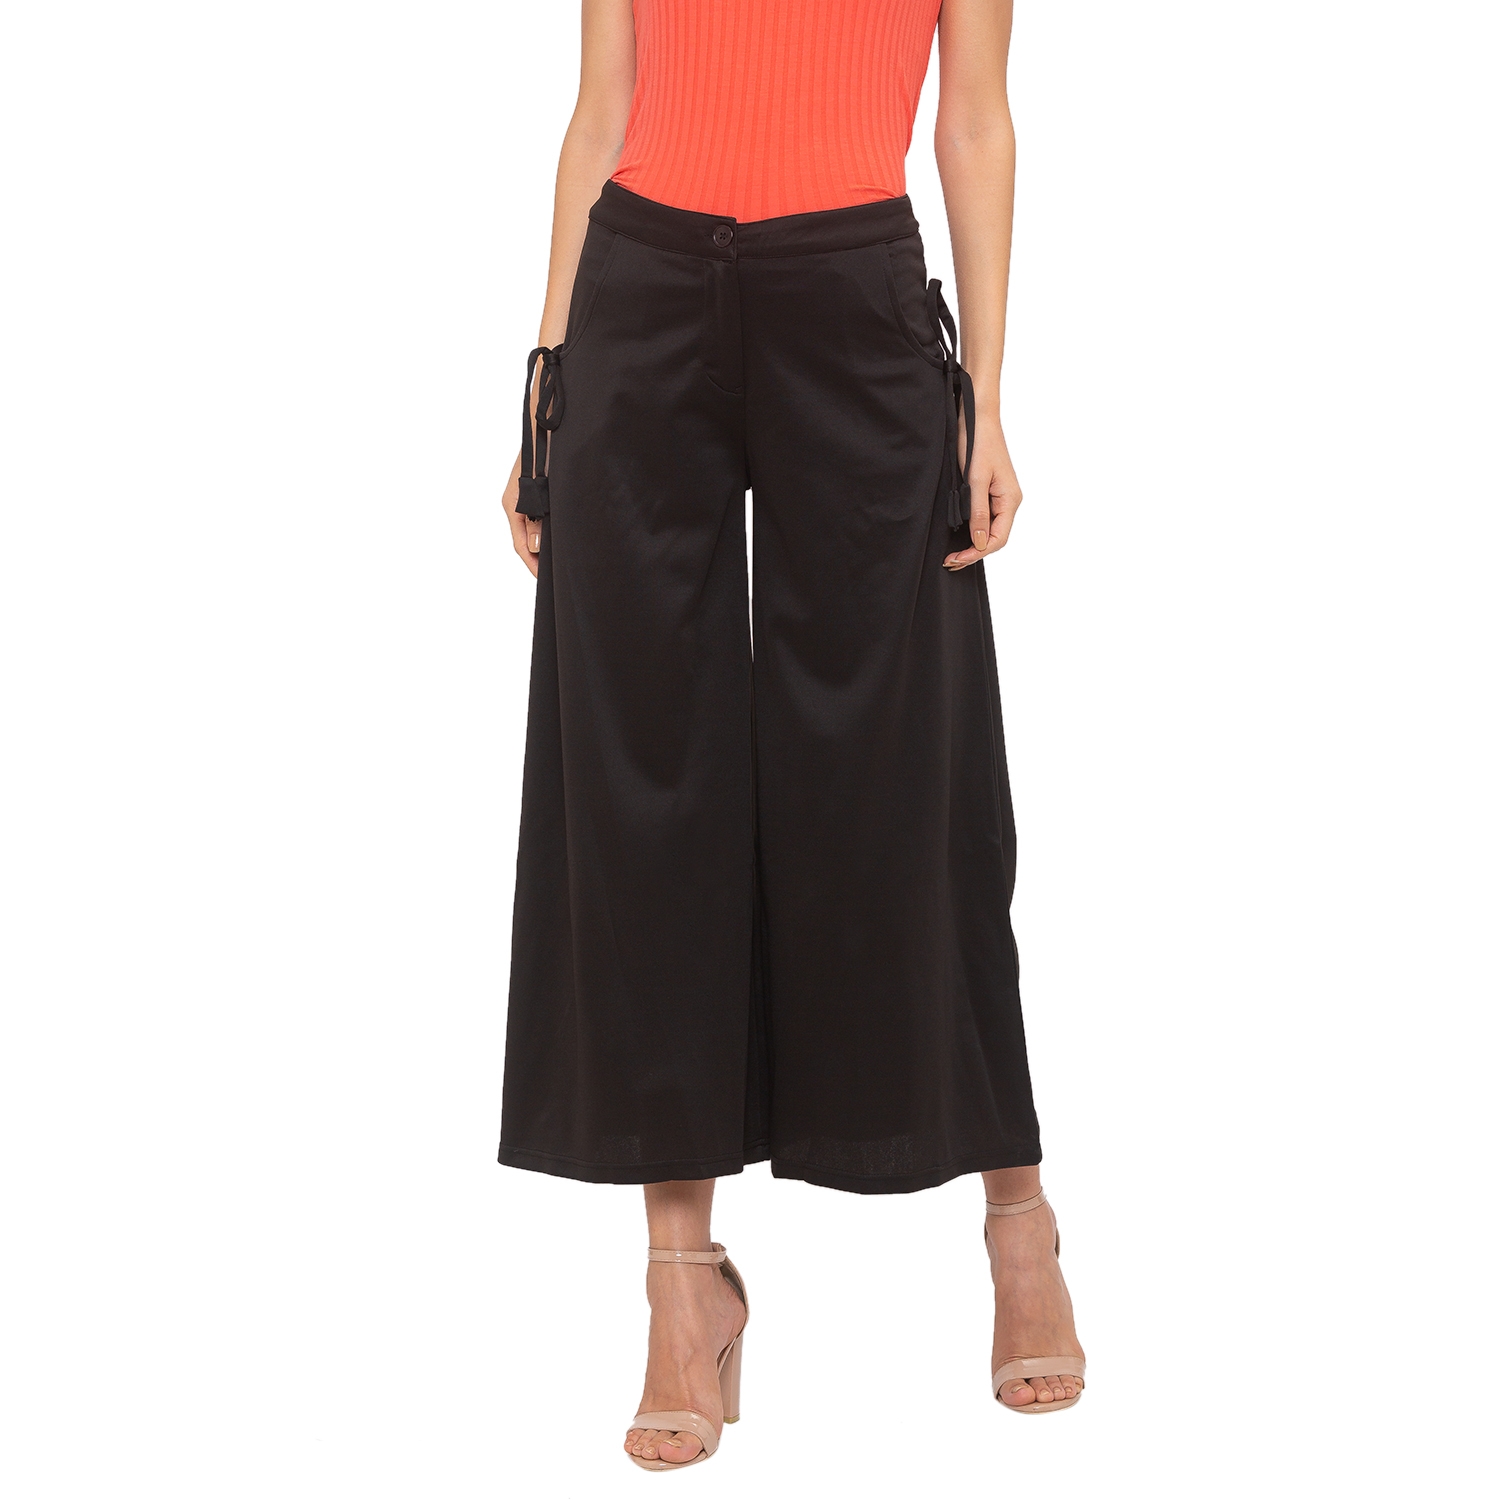 globus | Women's Black Polyester Solid Culottes 0